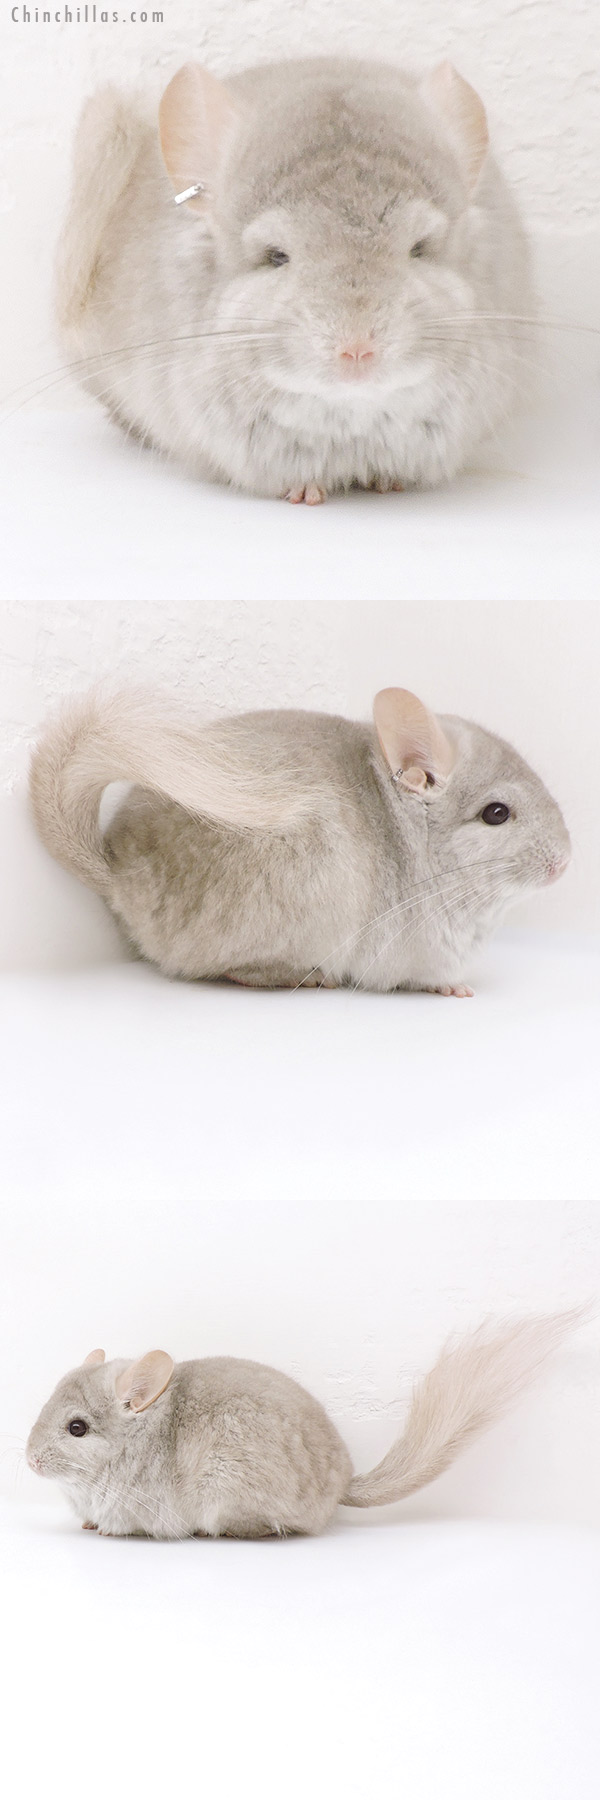 Chinchilla or related item offered for sale or export on Chinchillas.com - 17361 Beige  Royal Persian Angora Male Chinchilla